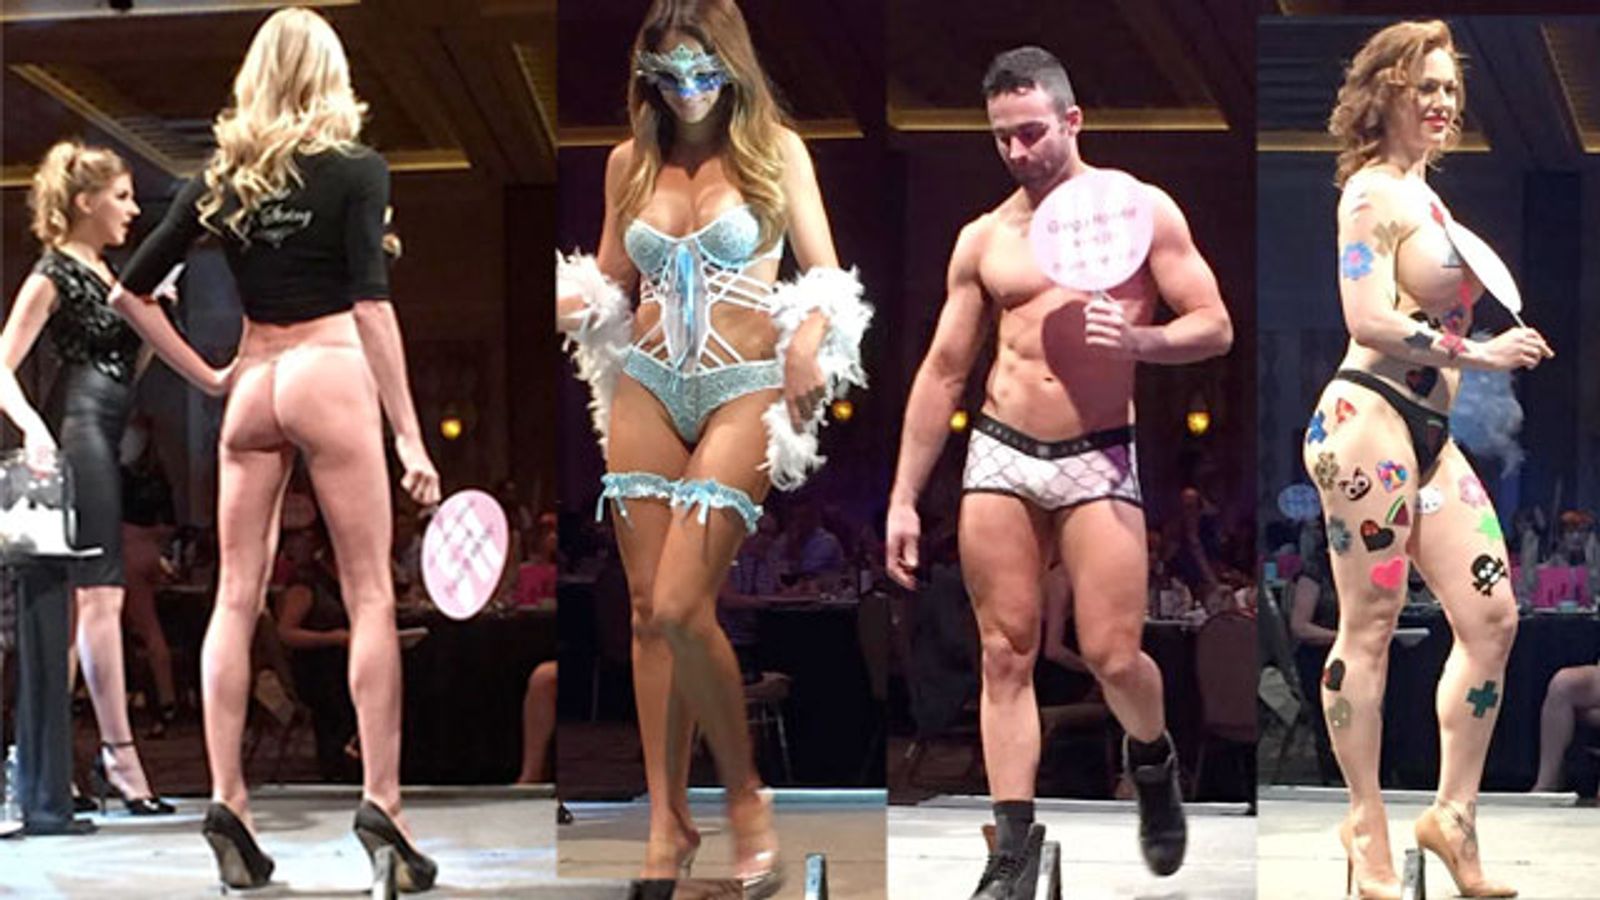 International Lingerie Show Spruces Up Opening Fashion Show